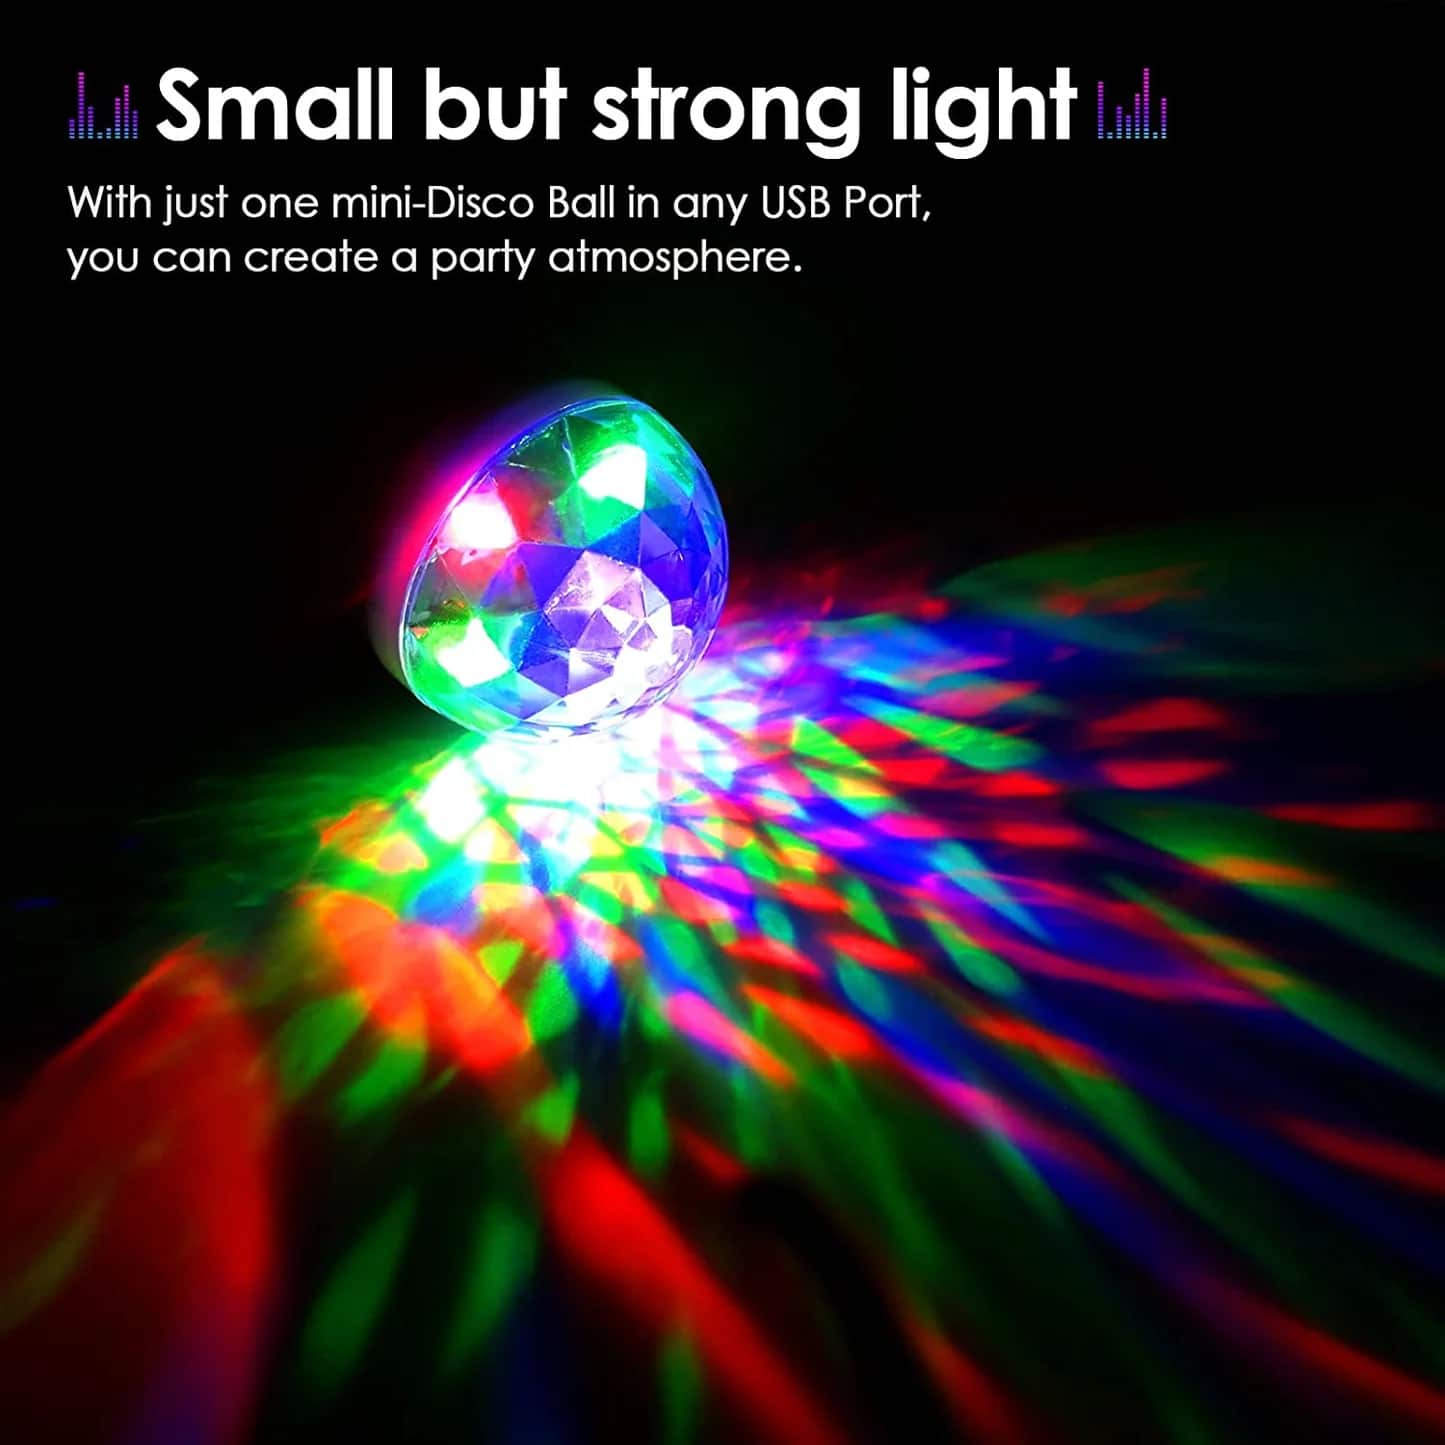 The Ravelight USB mini-Disco Party Lights small but strong light product benefit